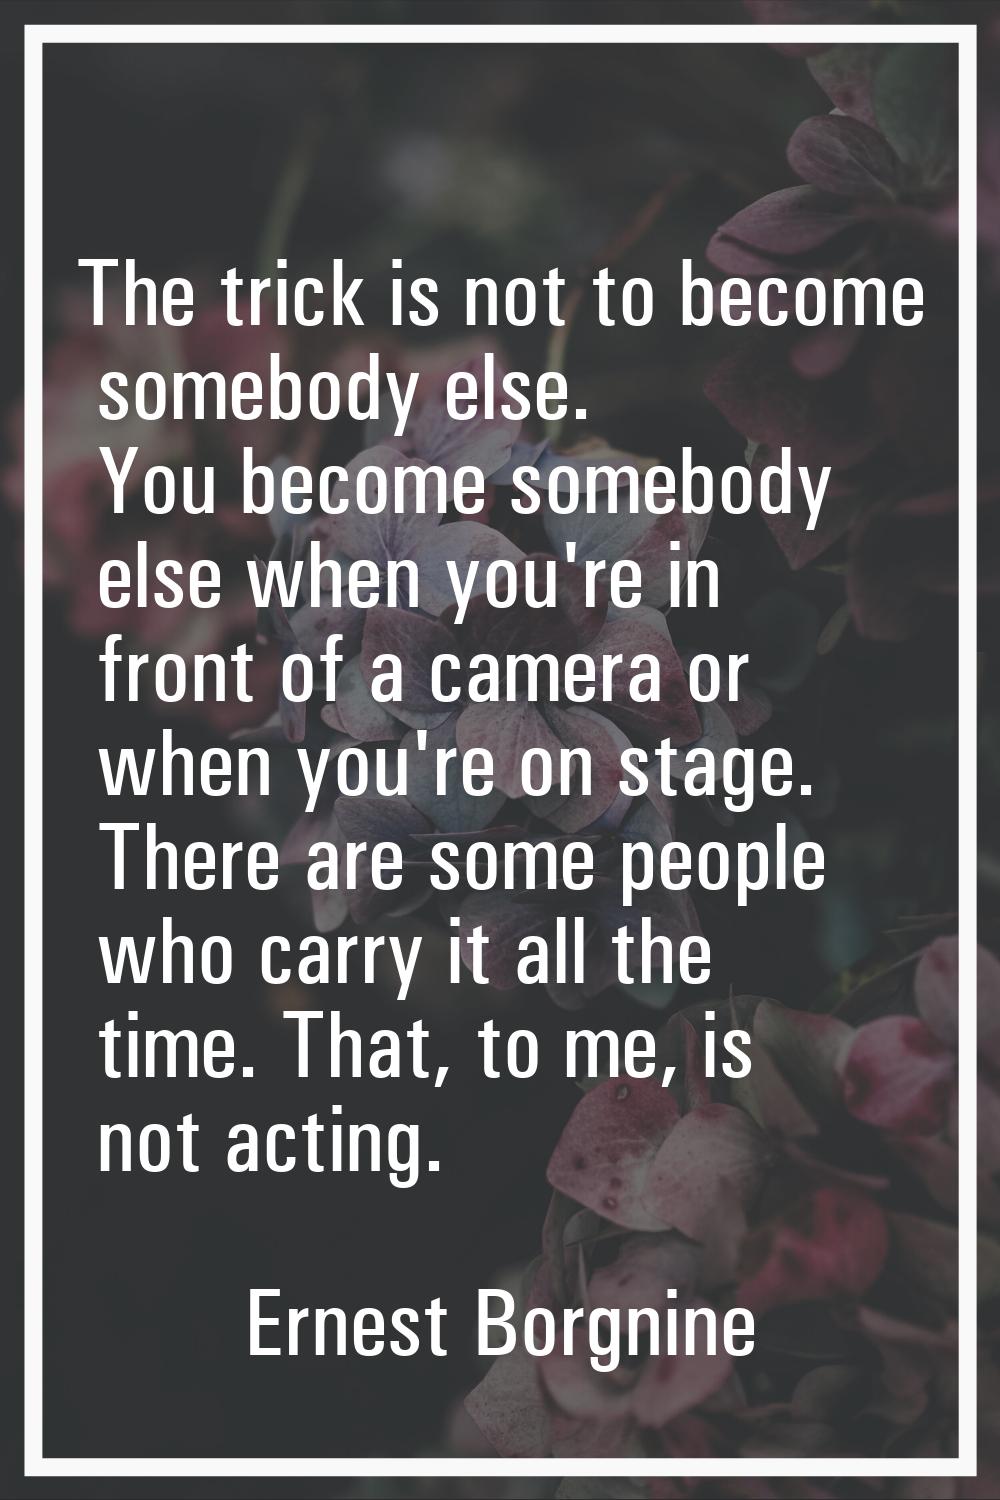 The trick is not to become somebody else. You become somebody else when you're in front of a camera